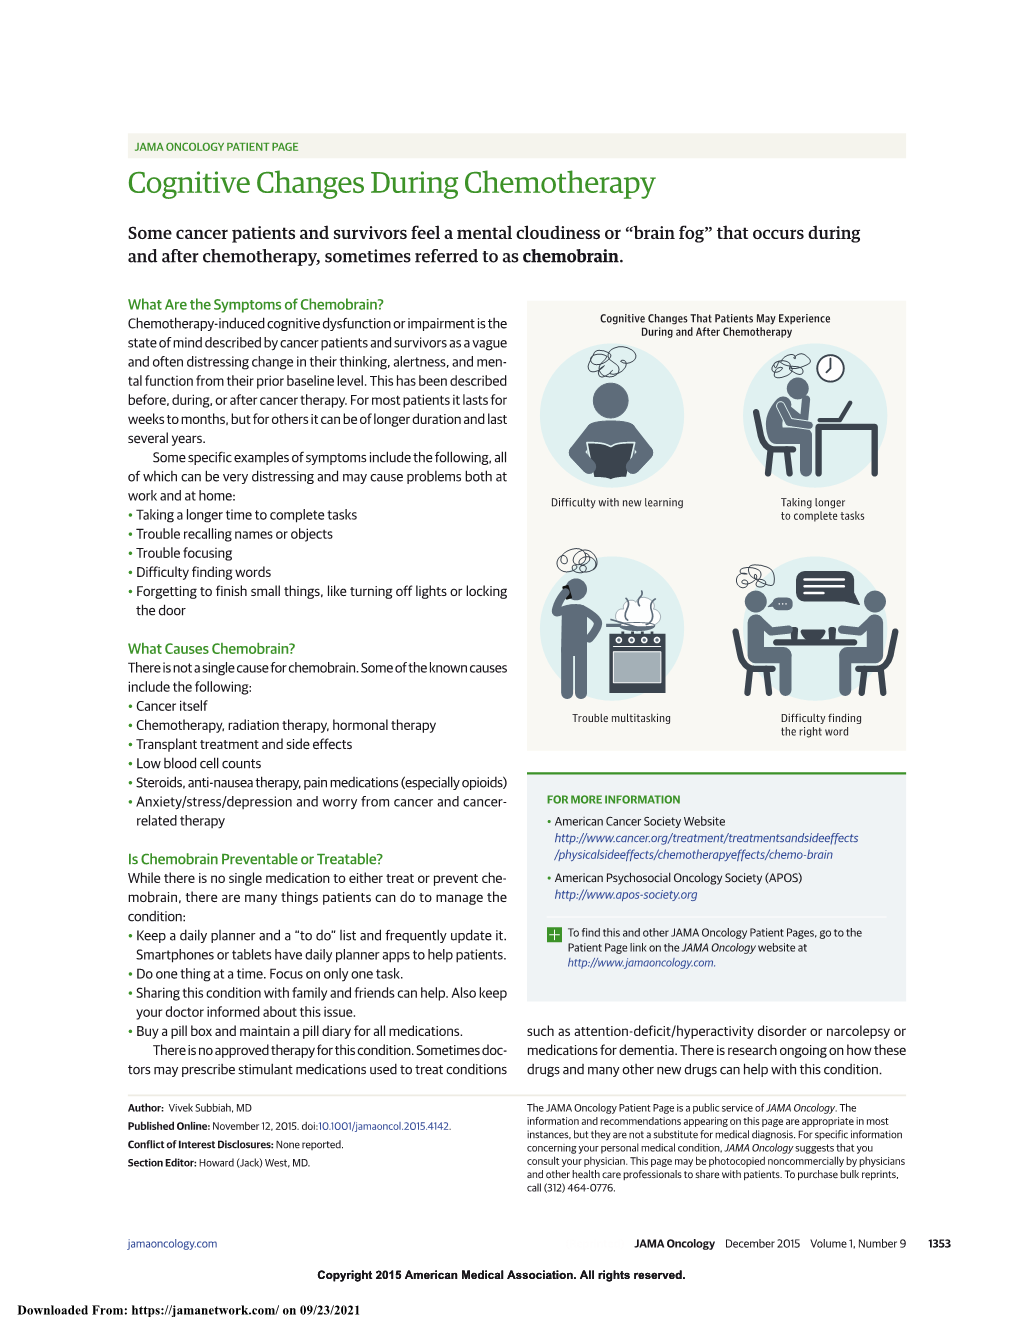 Cognitive Changes During Chemotherapy